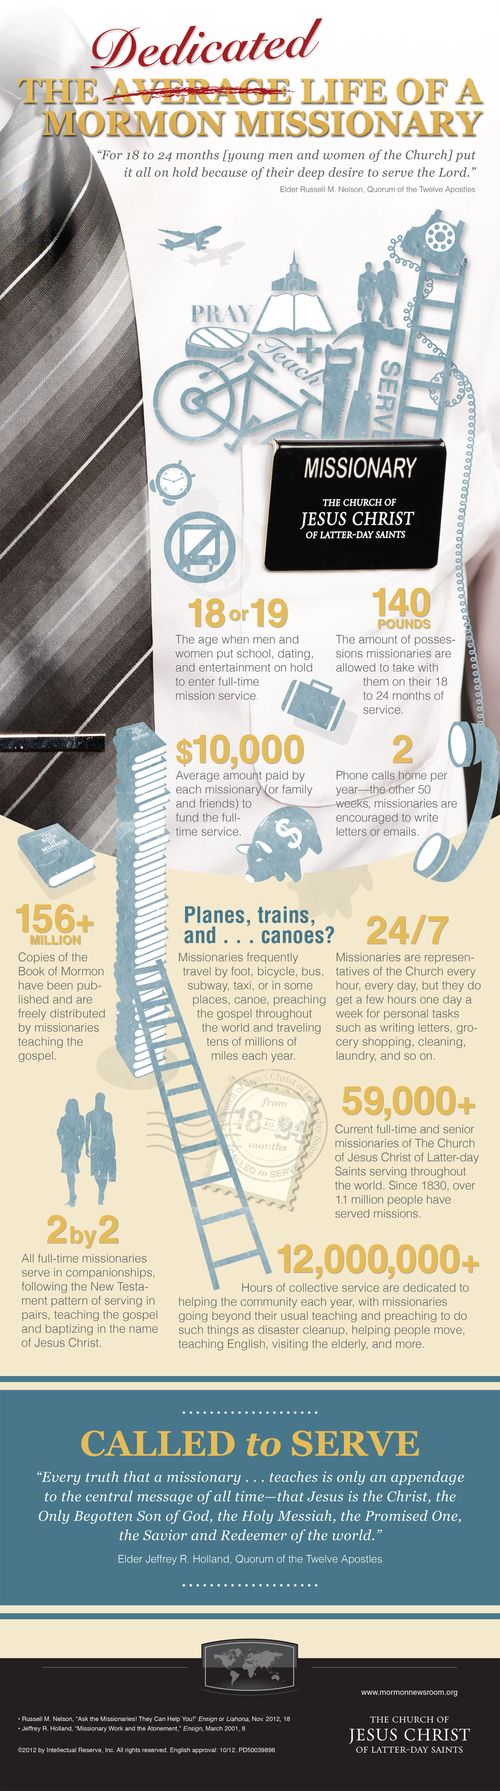 An infographic describing the lifestyle and expectations of a Mormon missionary, with an image of a missionary's tie and tag as the centerpiece.